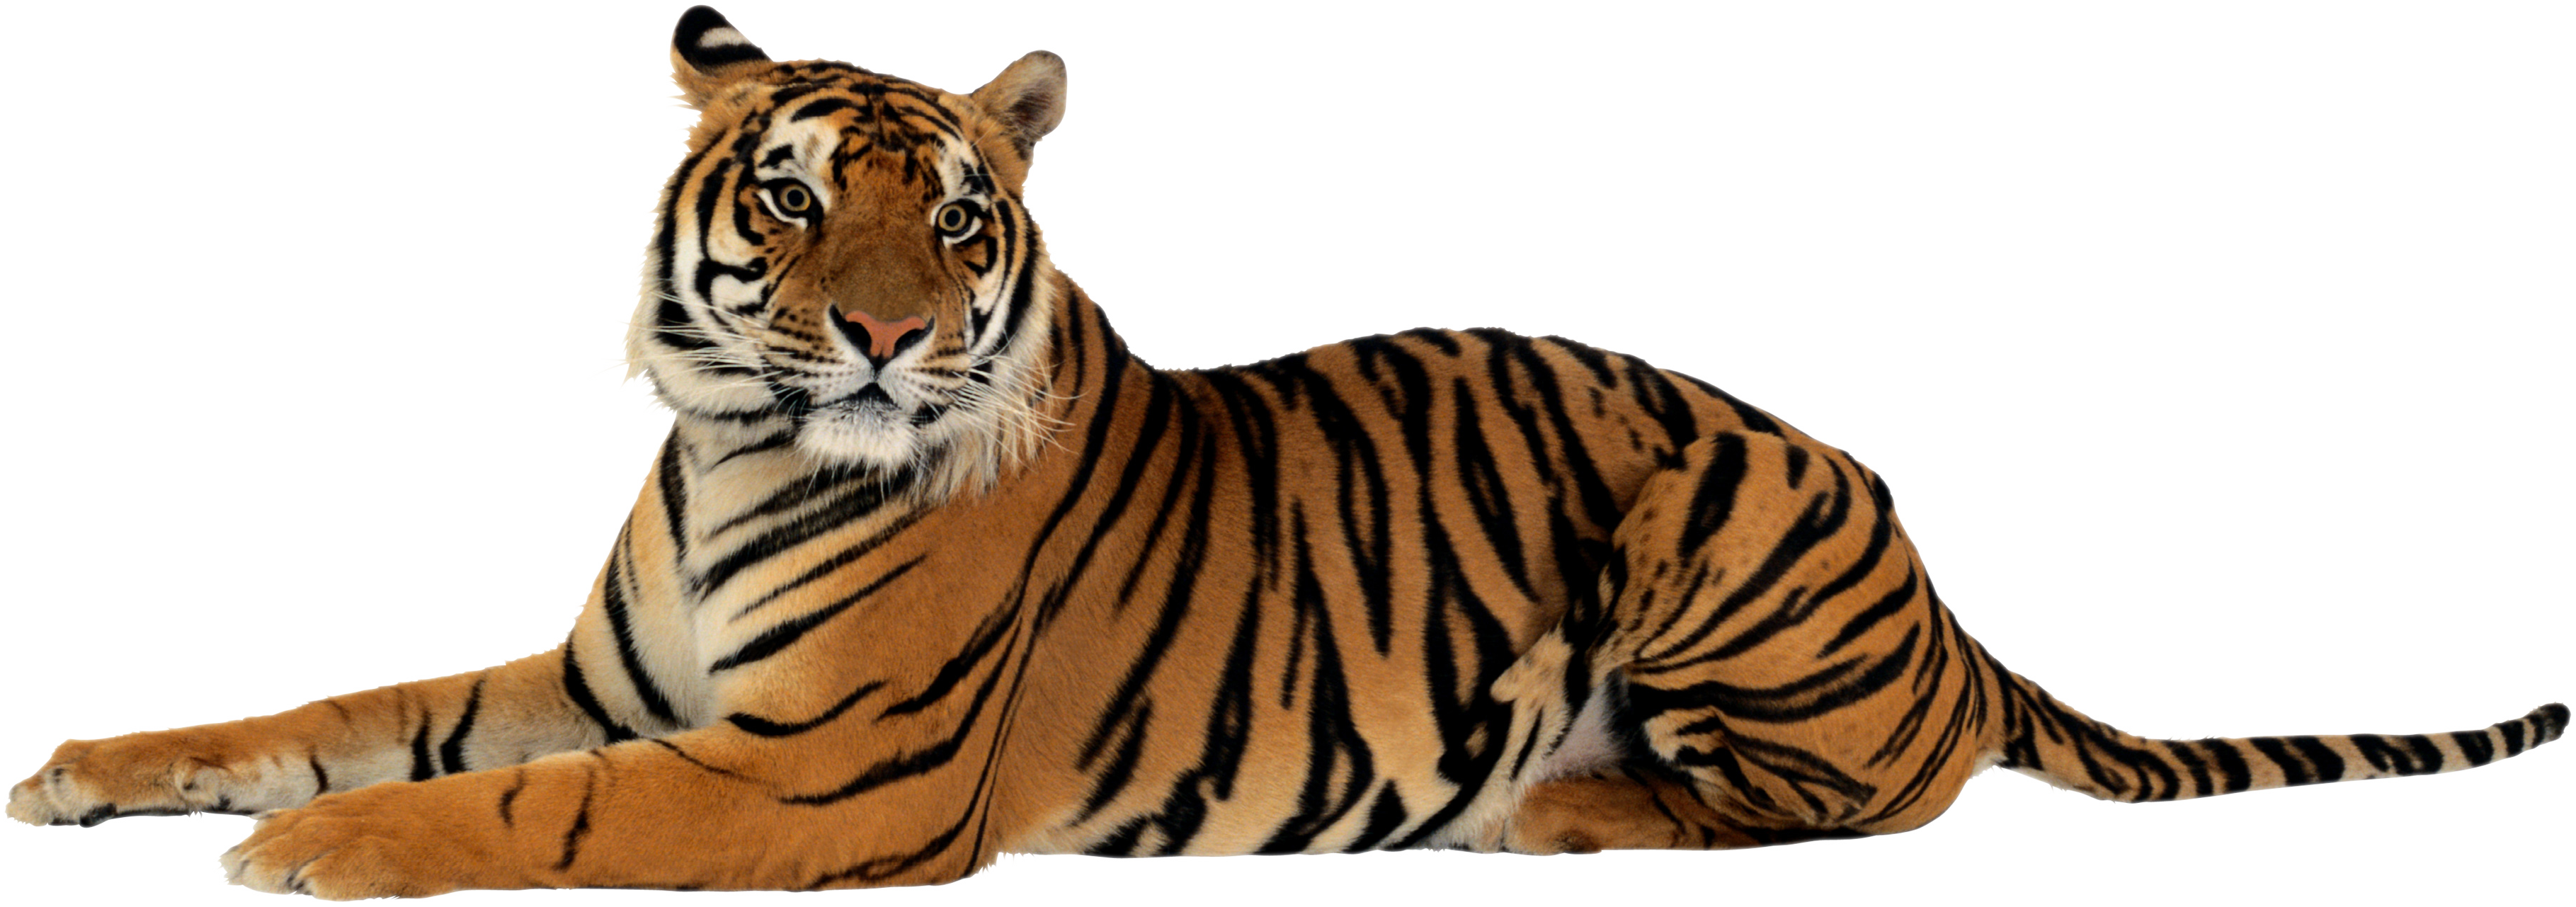 Tiger Transparent PNG Pictures - Free Icons and PNG Backgrounds